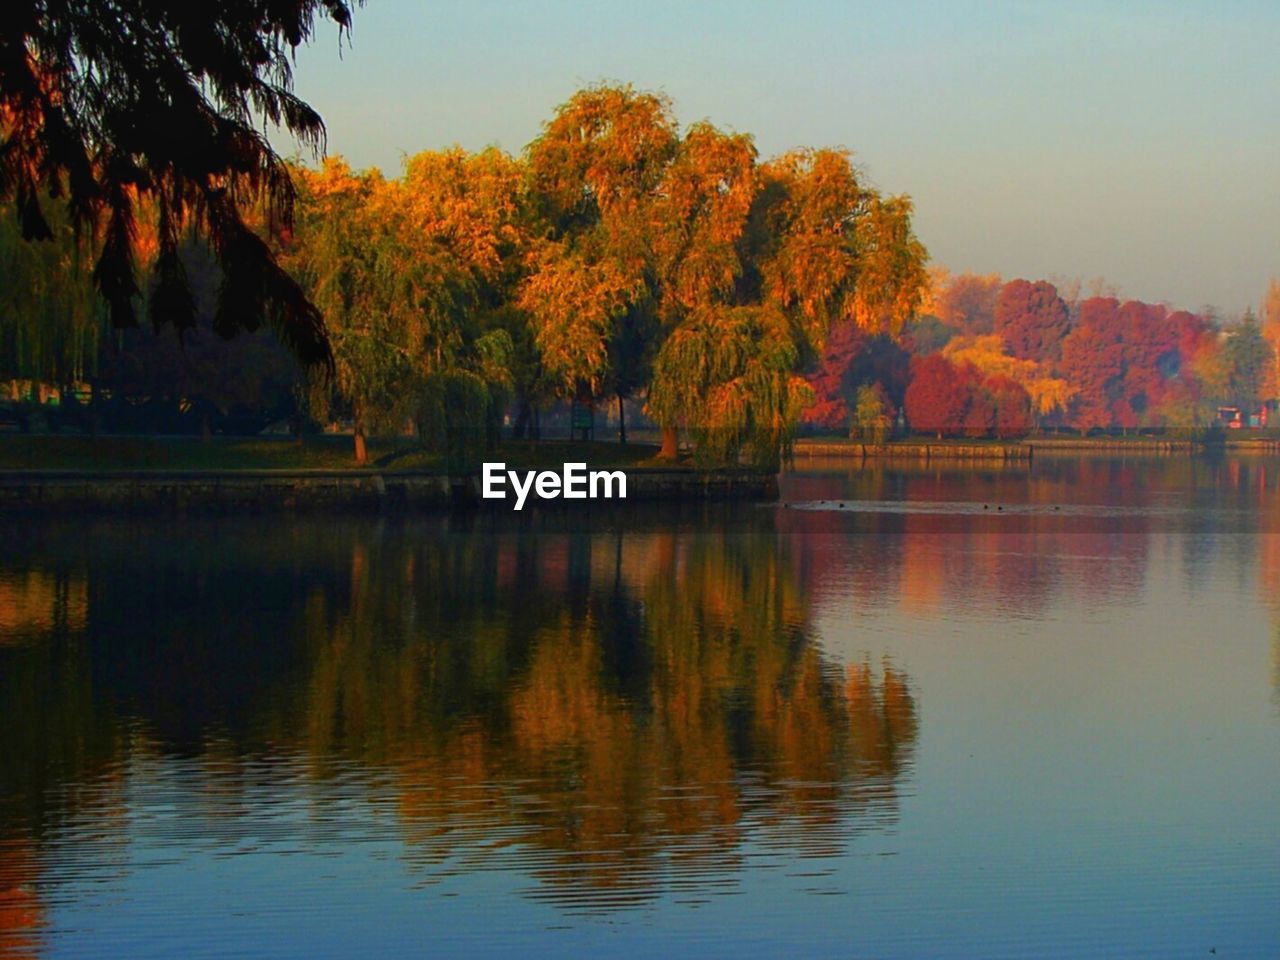 SCENIC VIEW OF LAKE BY TREES AGAINST ORANGE SKY